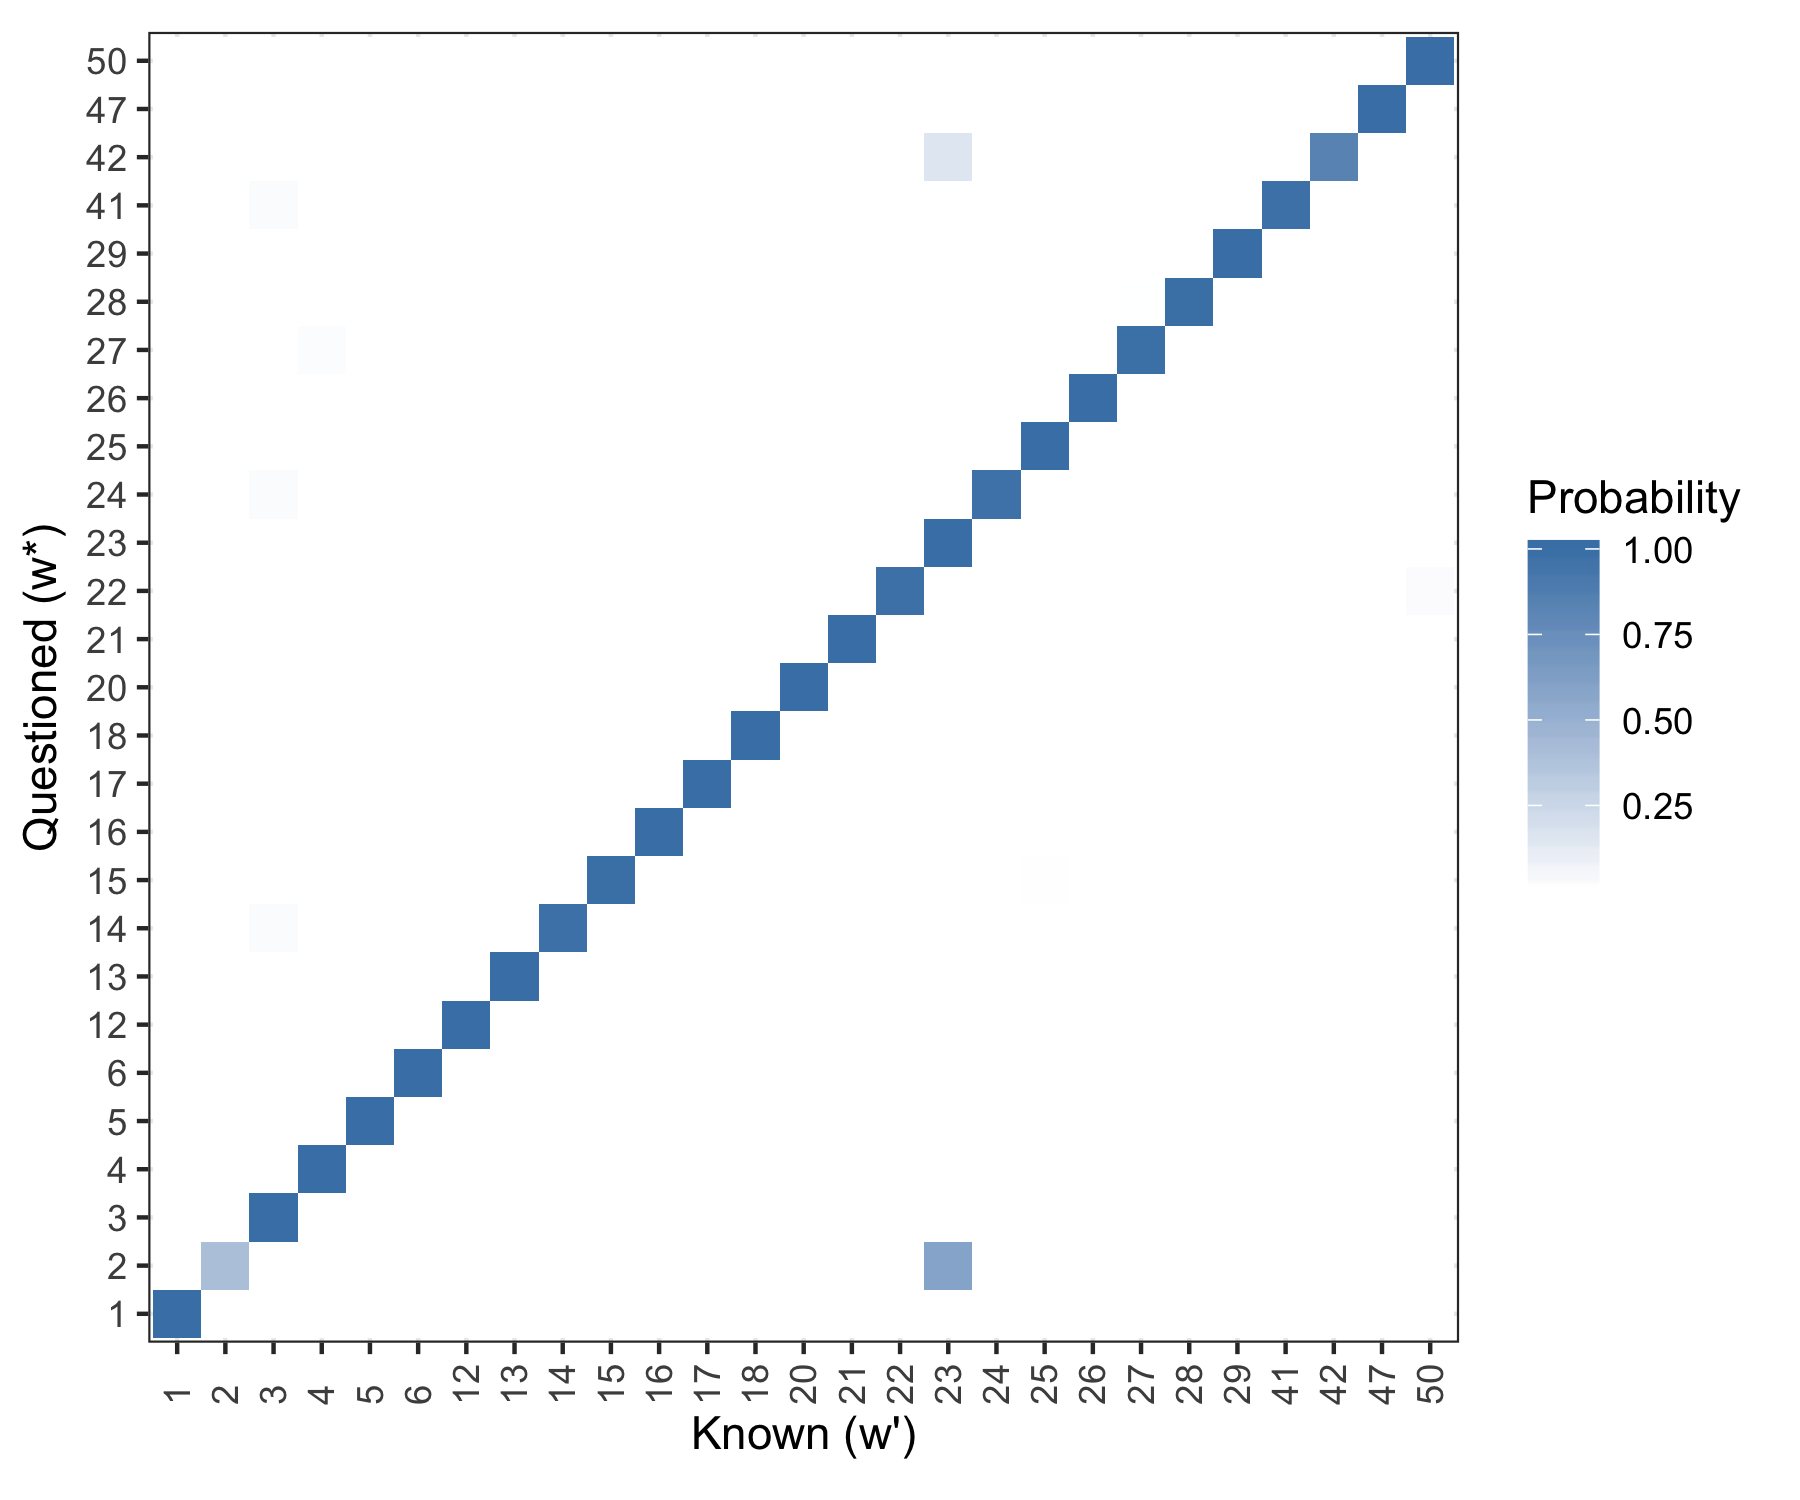 Posterior predictive results. Rows are evaluated independently and the probability in each row sums to one. Log Loss = 0.0883.